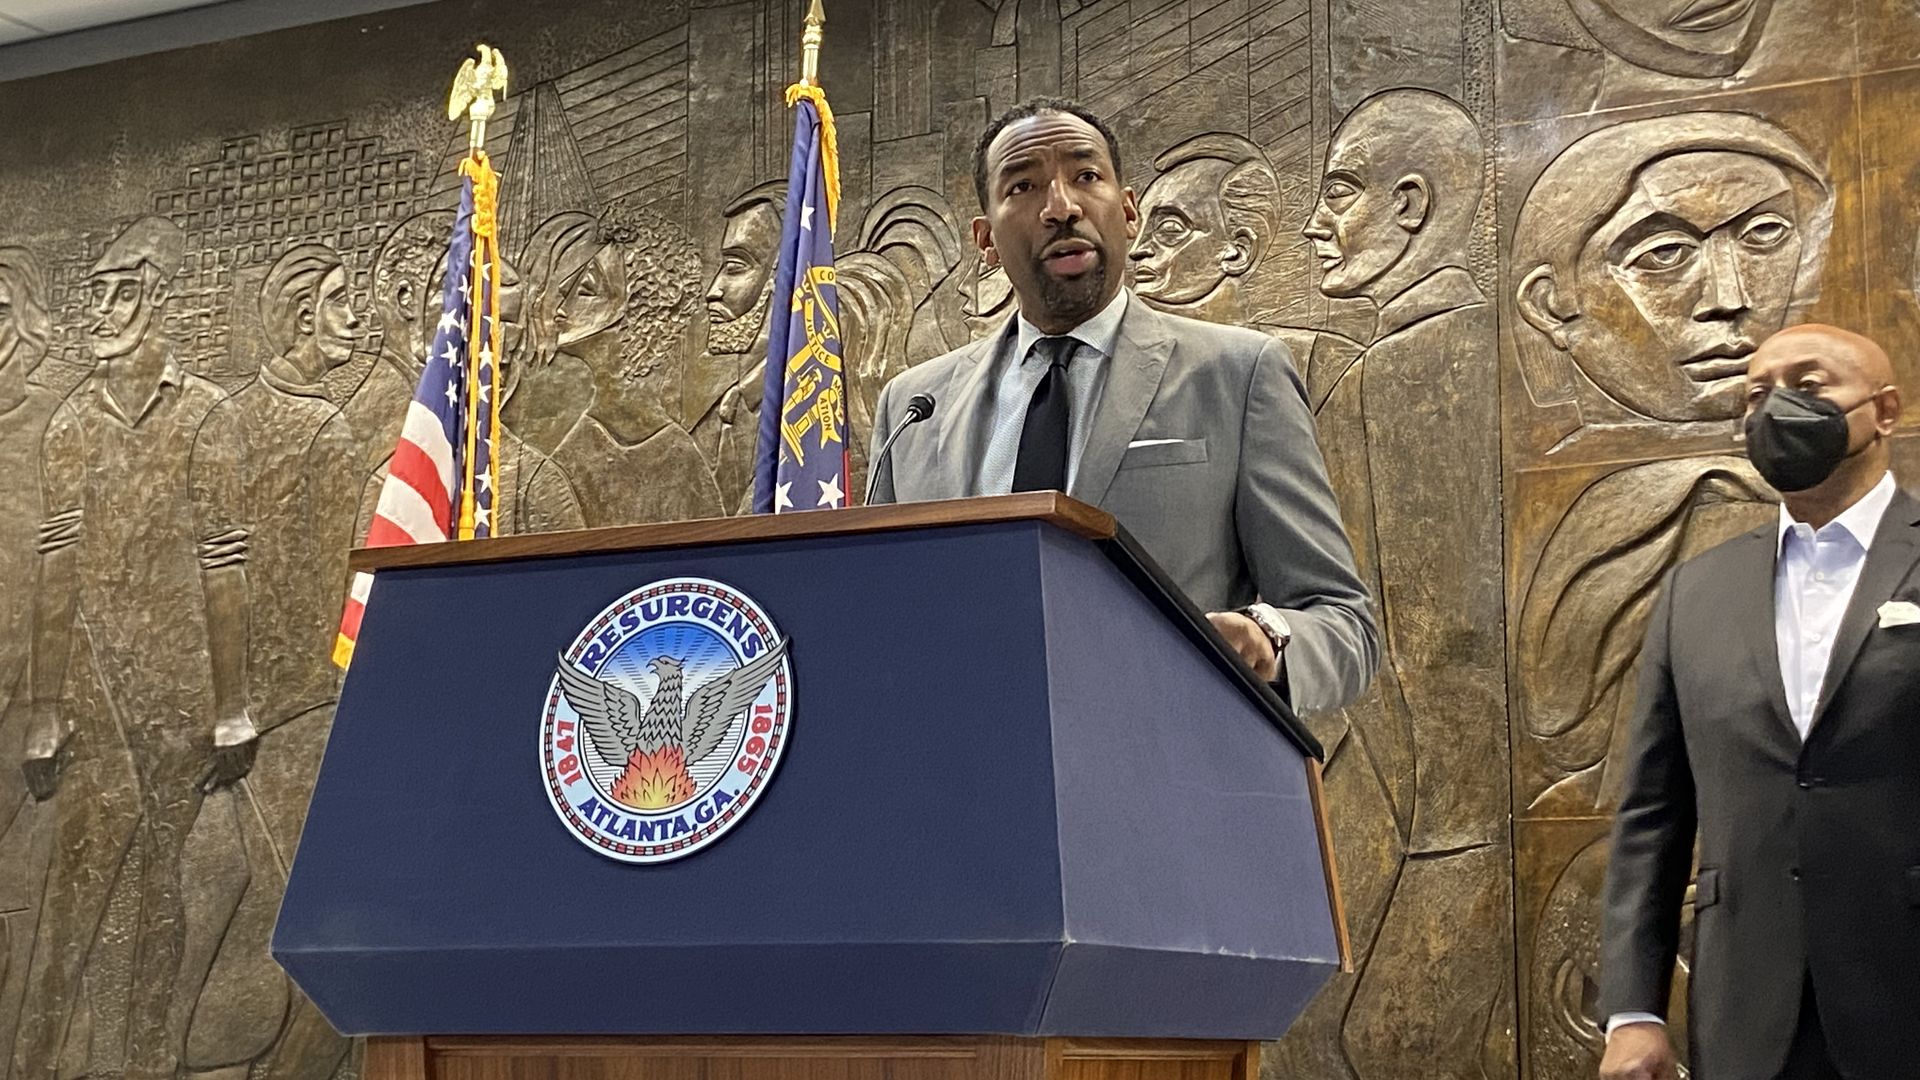 Mayor Andre Dickens, a tall man wearing a gray suit, stands at a lectern with the Atlanta city seal and in front of a bas relief wall sculpture of people's faces